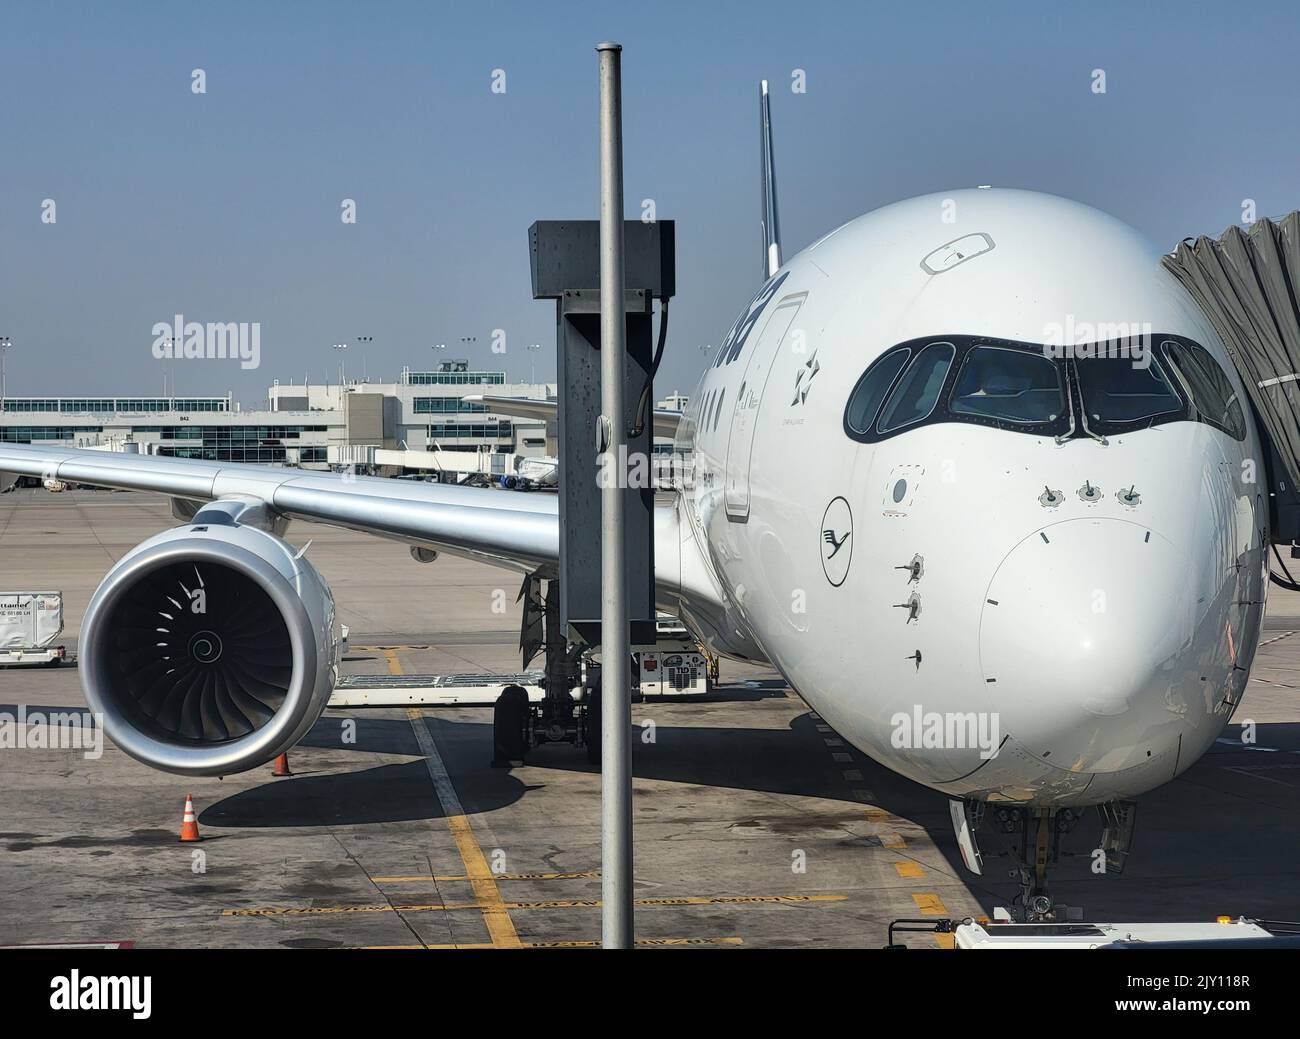 MUNICH, GERMANY - SEPTEMBER 7: Lufthansa Airbus wing with docked Lufthansa planes at the Gates of Munich Airport on September 7, 2022 in Munich Stock Photo